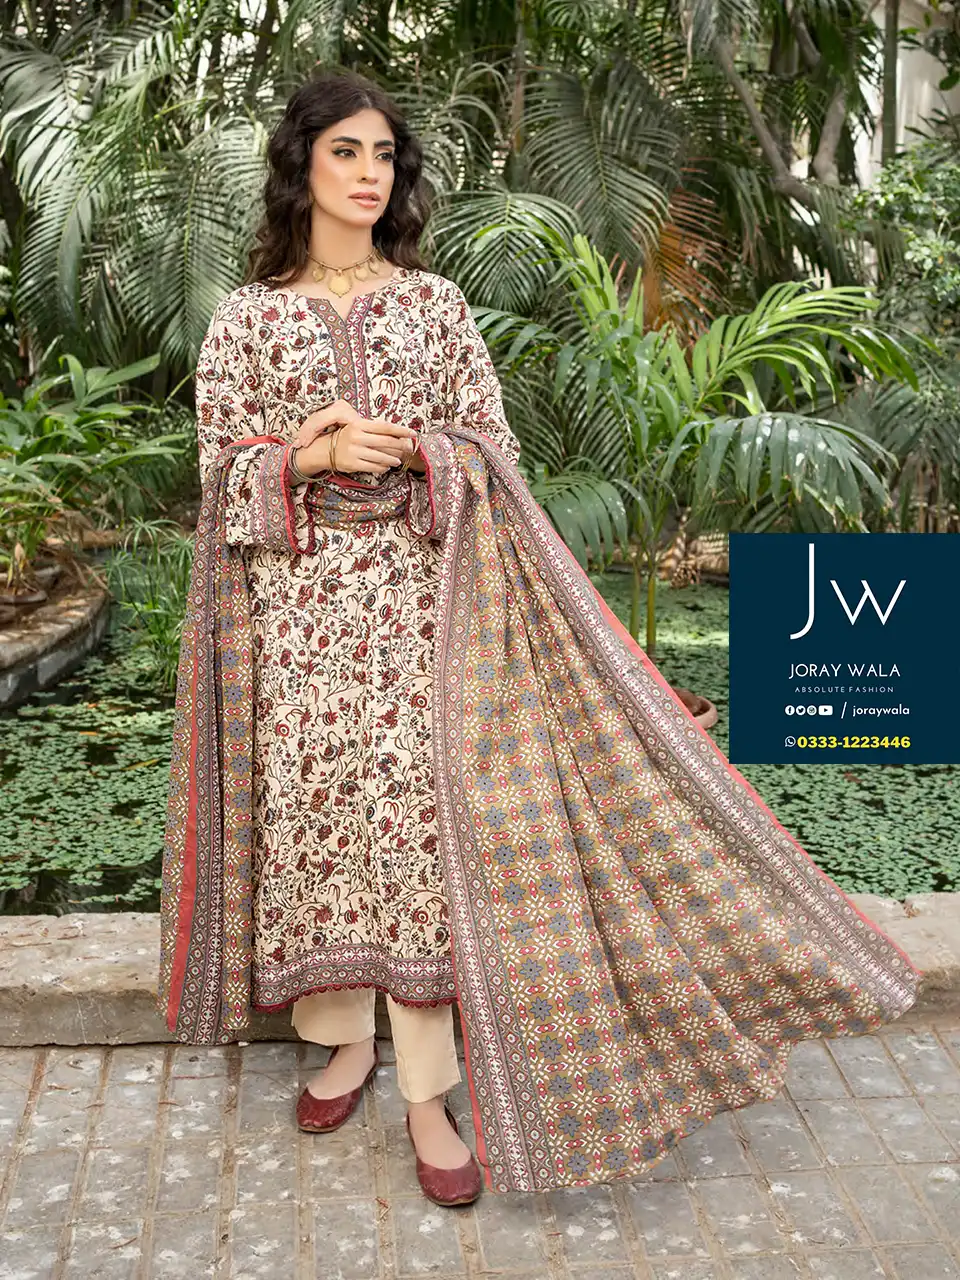 Zesh Summer Printed Lawn 2024 D5 available with free delivery at joraywala. 100% Original.